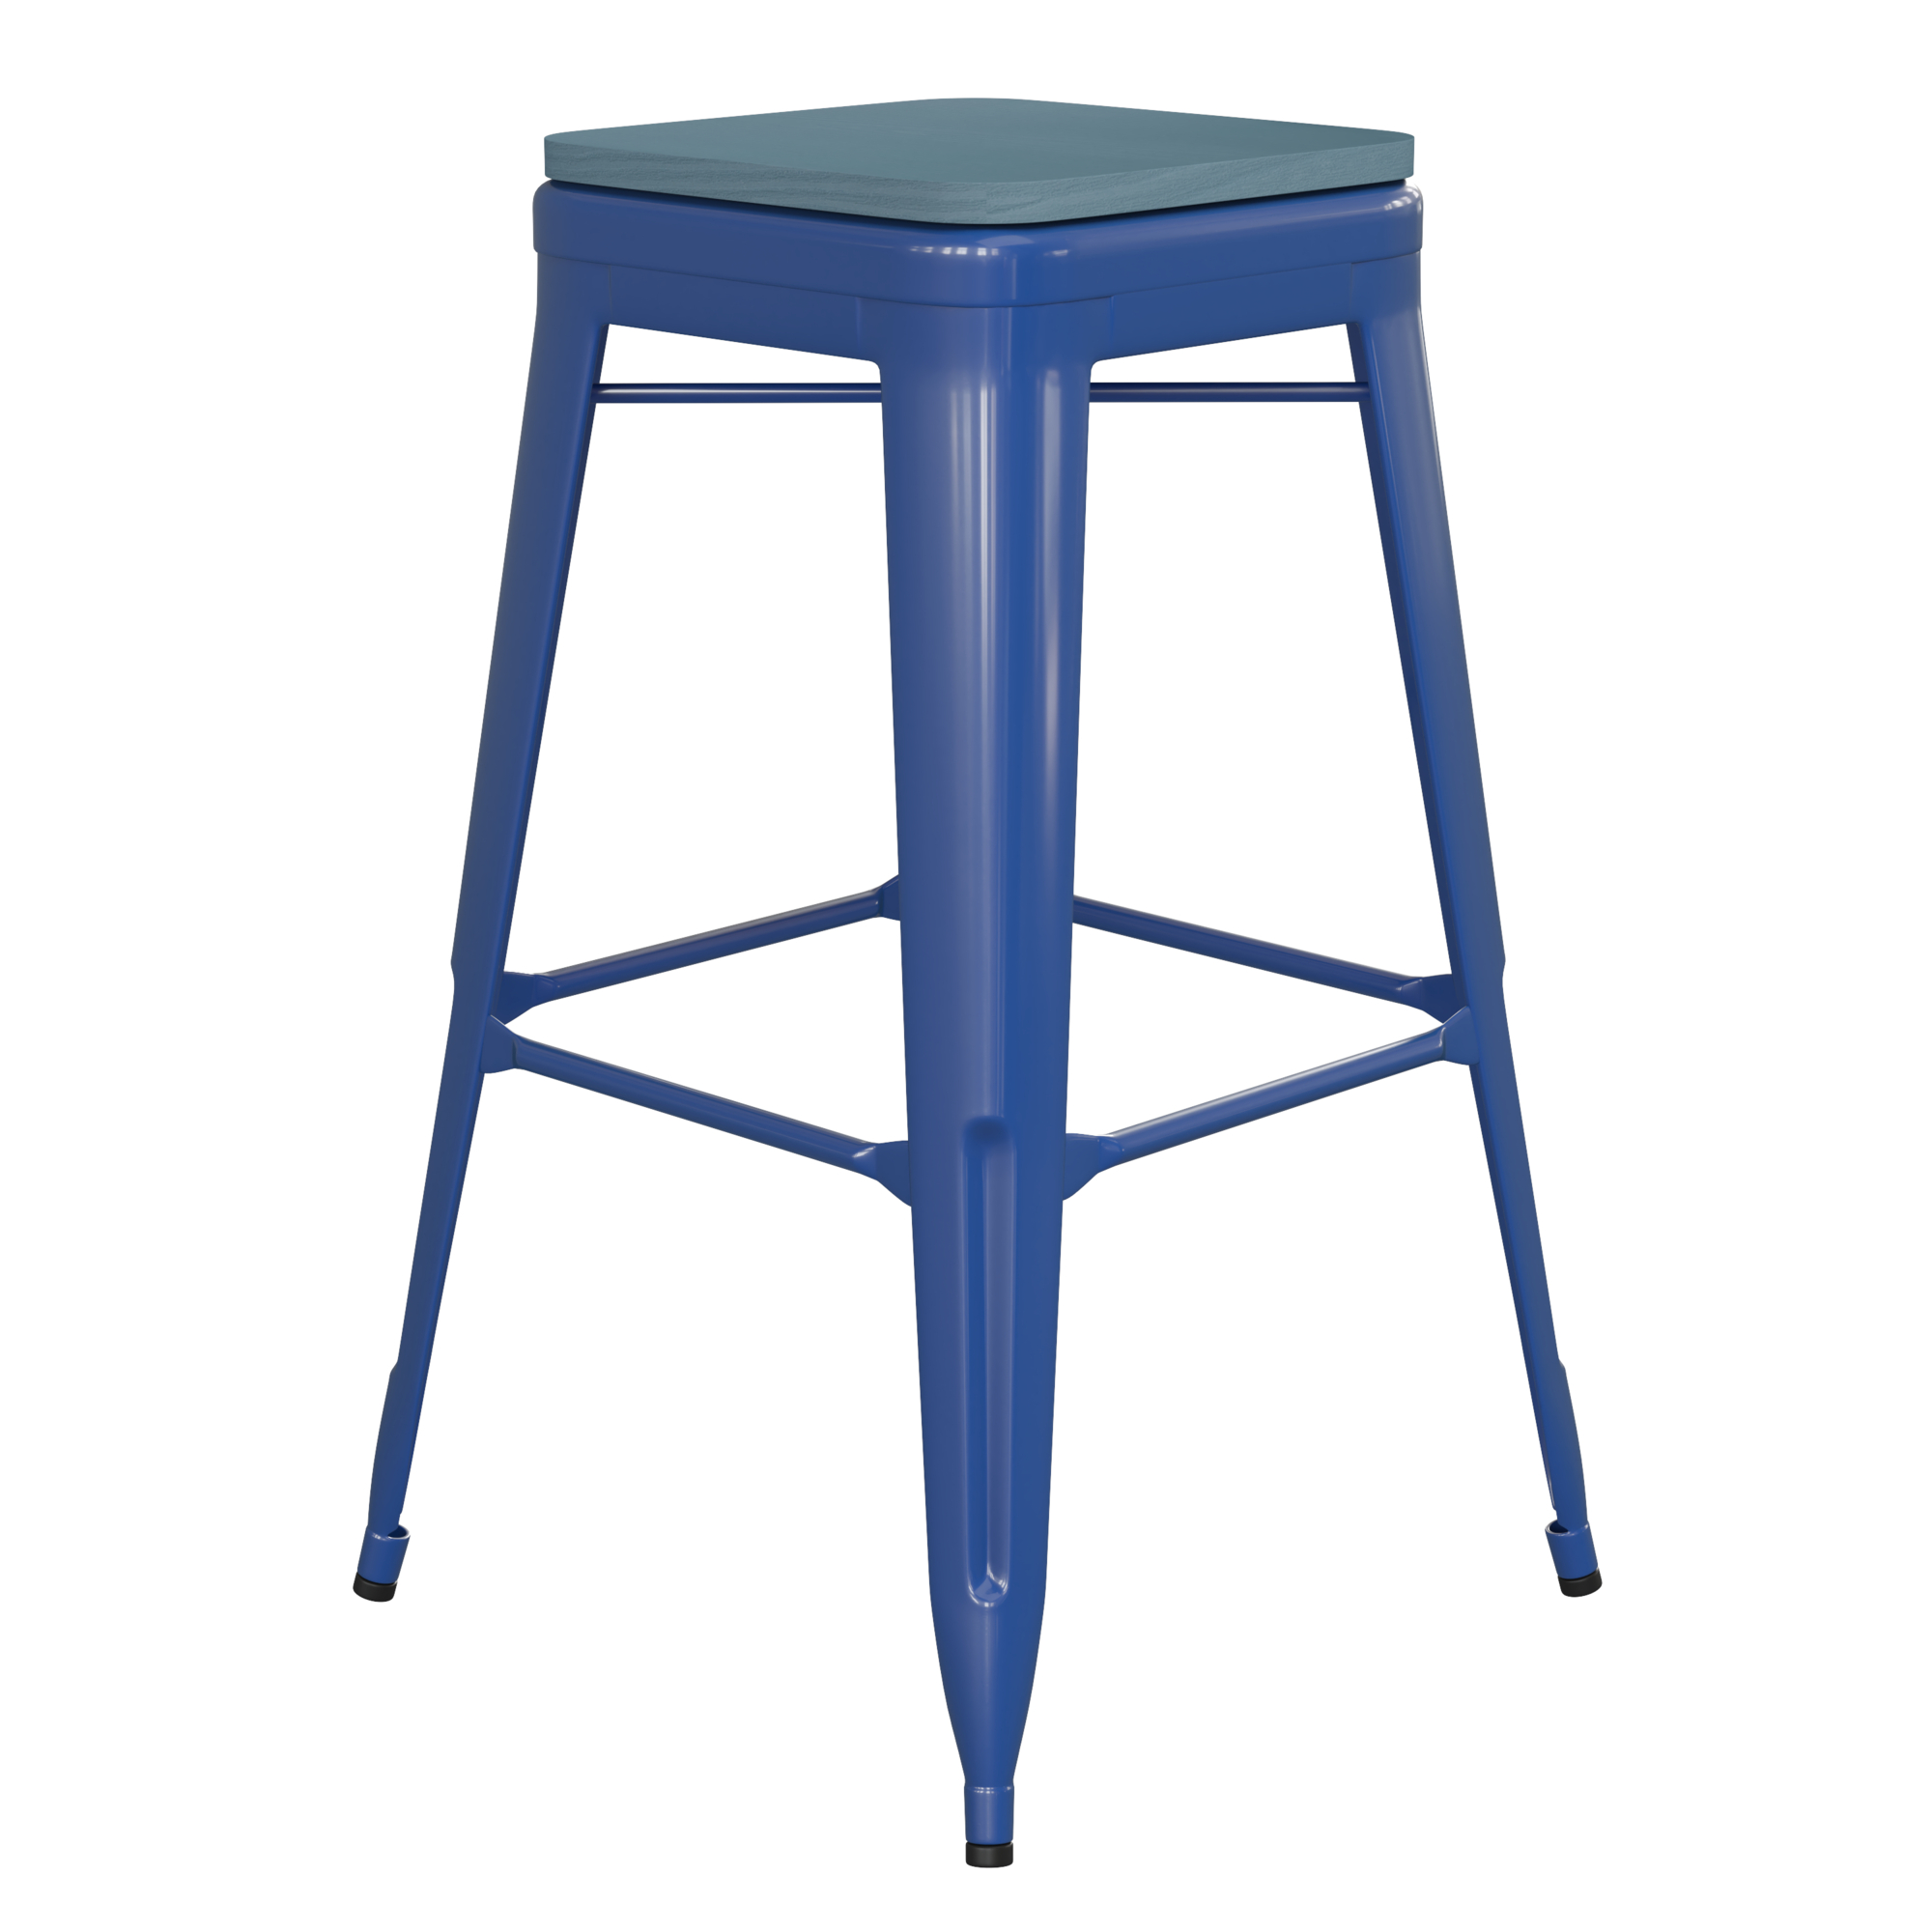 Flash Furniture, 30Inch Blue Metal Stool-Teal Blue Poly Seat, Primary Color Blue, Included (qty.) 1, Model CH3132030BLPL2C